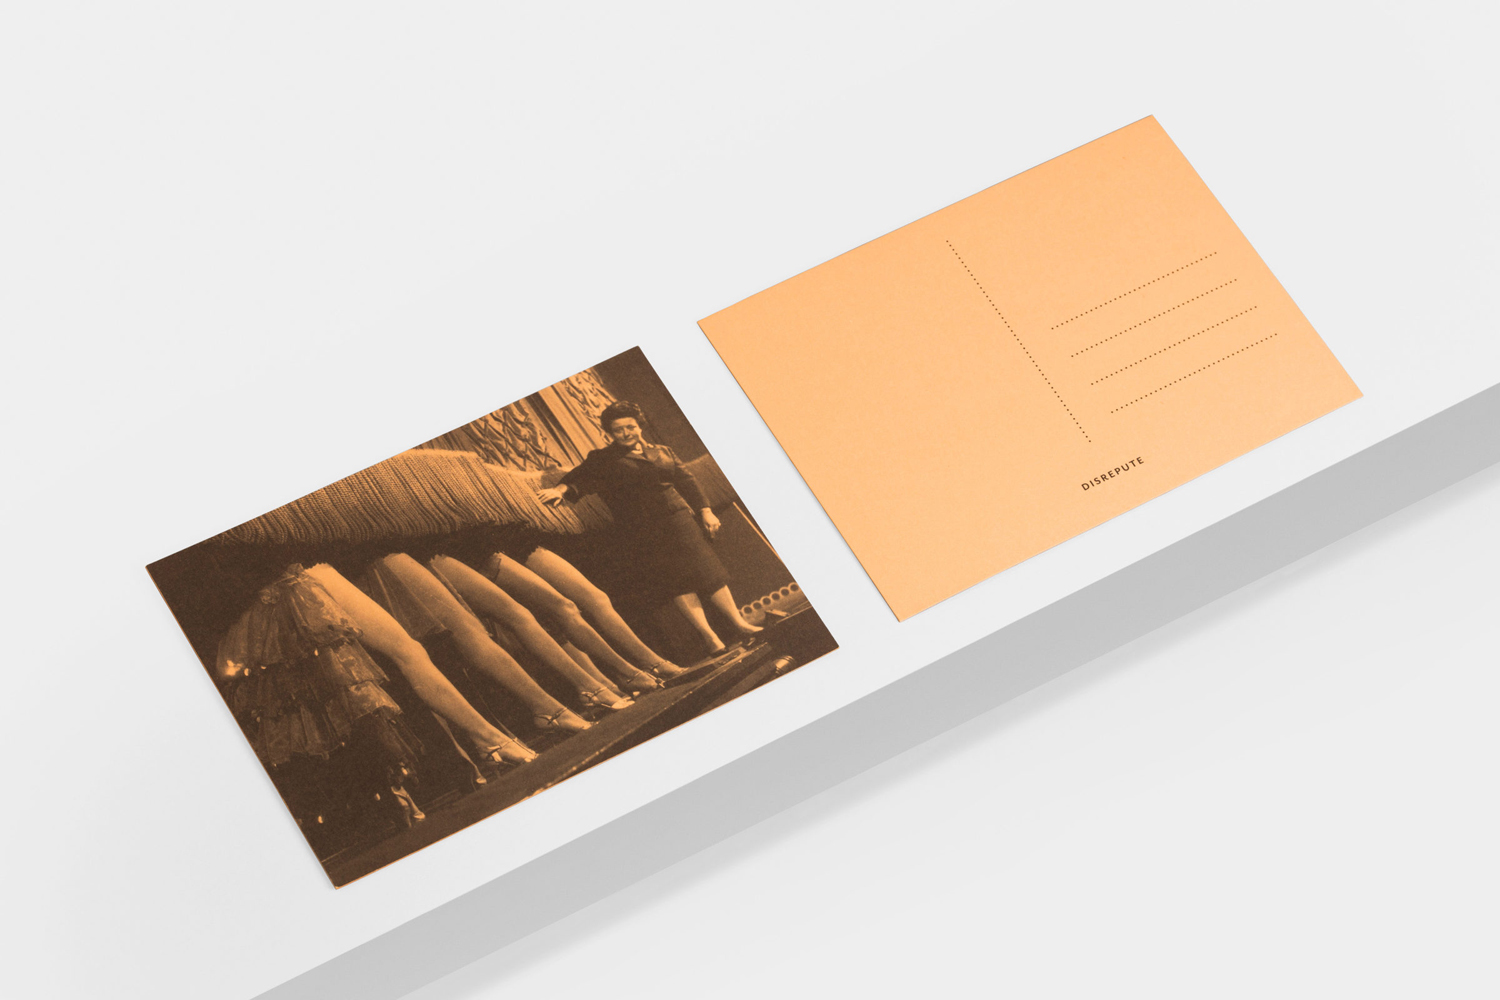 Brand identity and postcard featuring Arjowiggins Pop’set Apricot designed by London-based studio Two Times Elliott for Soho members bar Disrepute